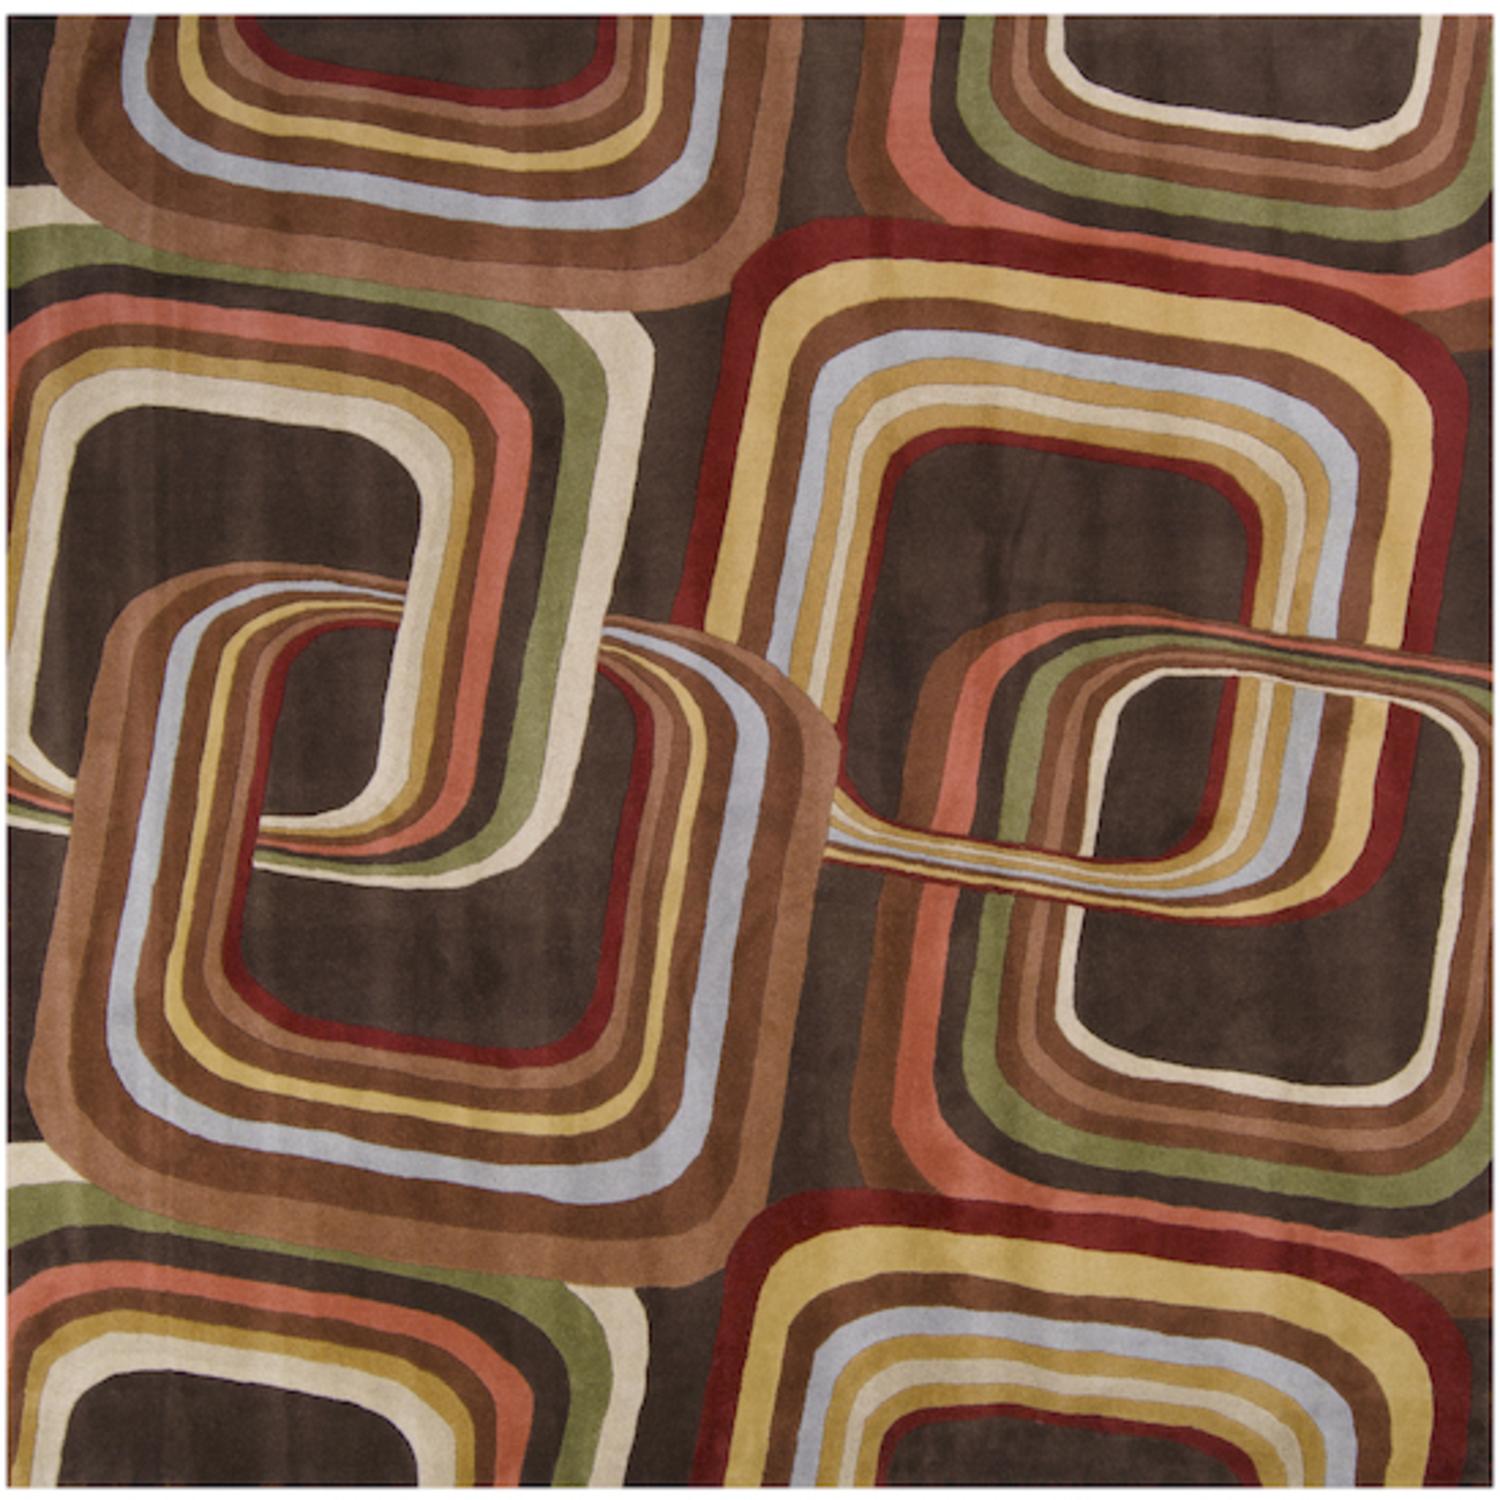 CC Home Furnishings 9.75' x 9.75' Eternal Apollo Contemporary Multi-Colored Wool Area Throw Rug